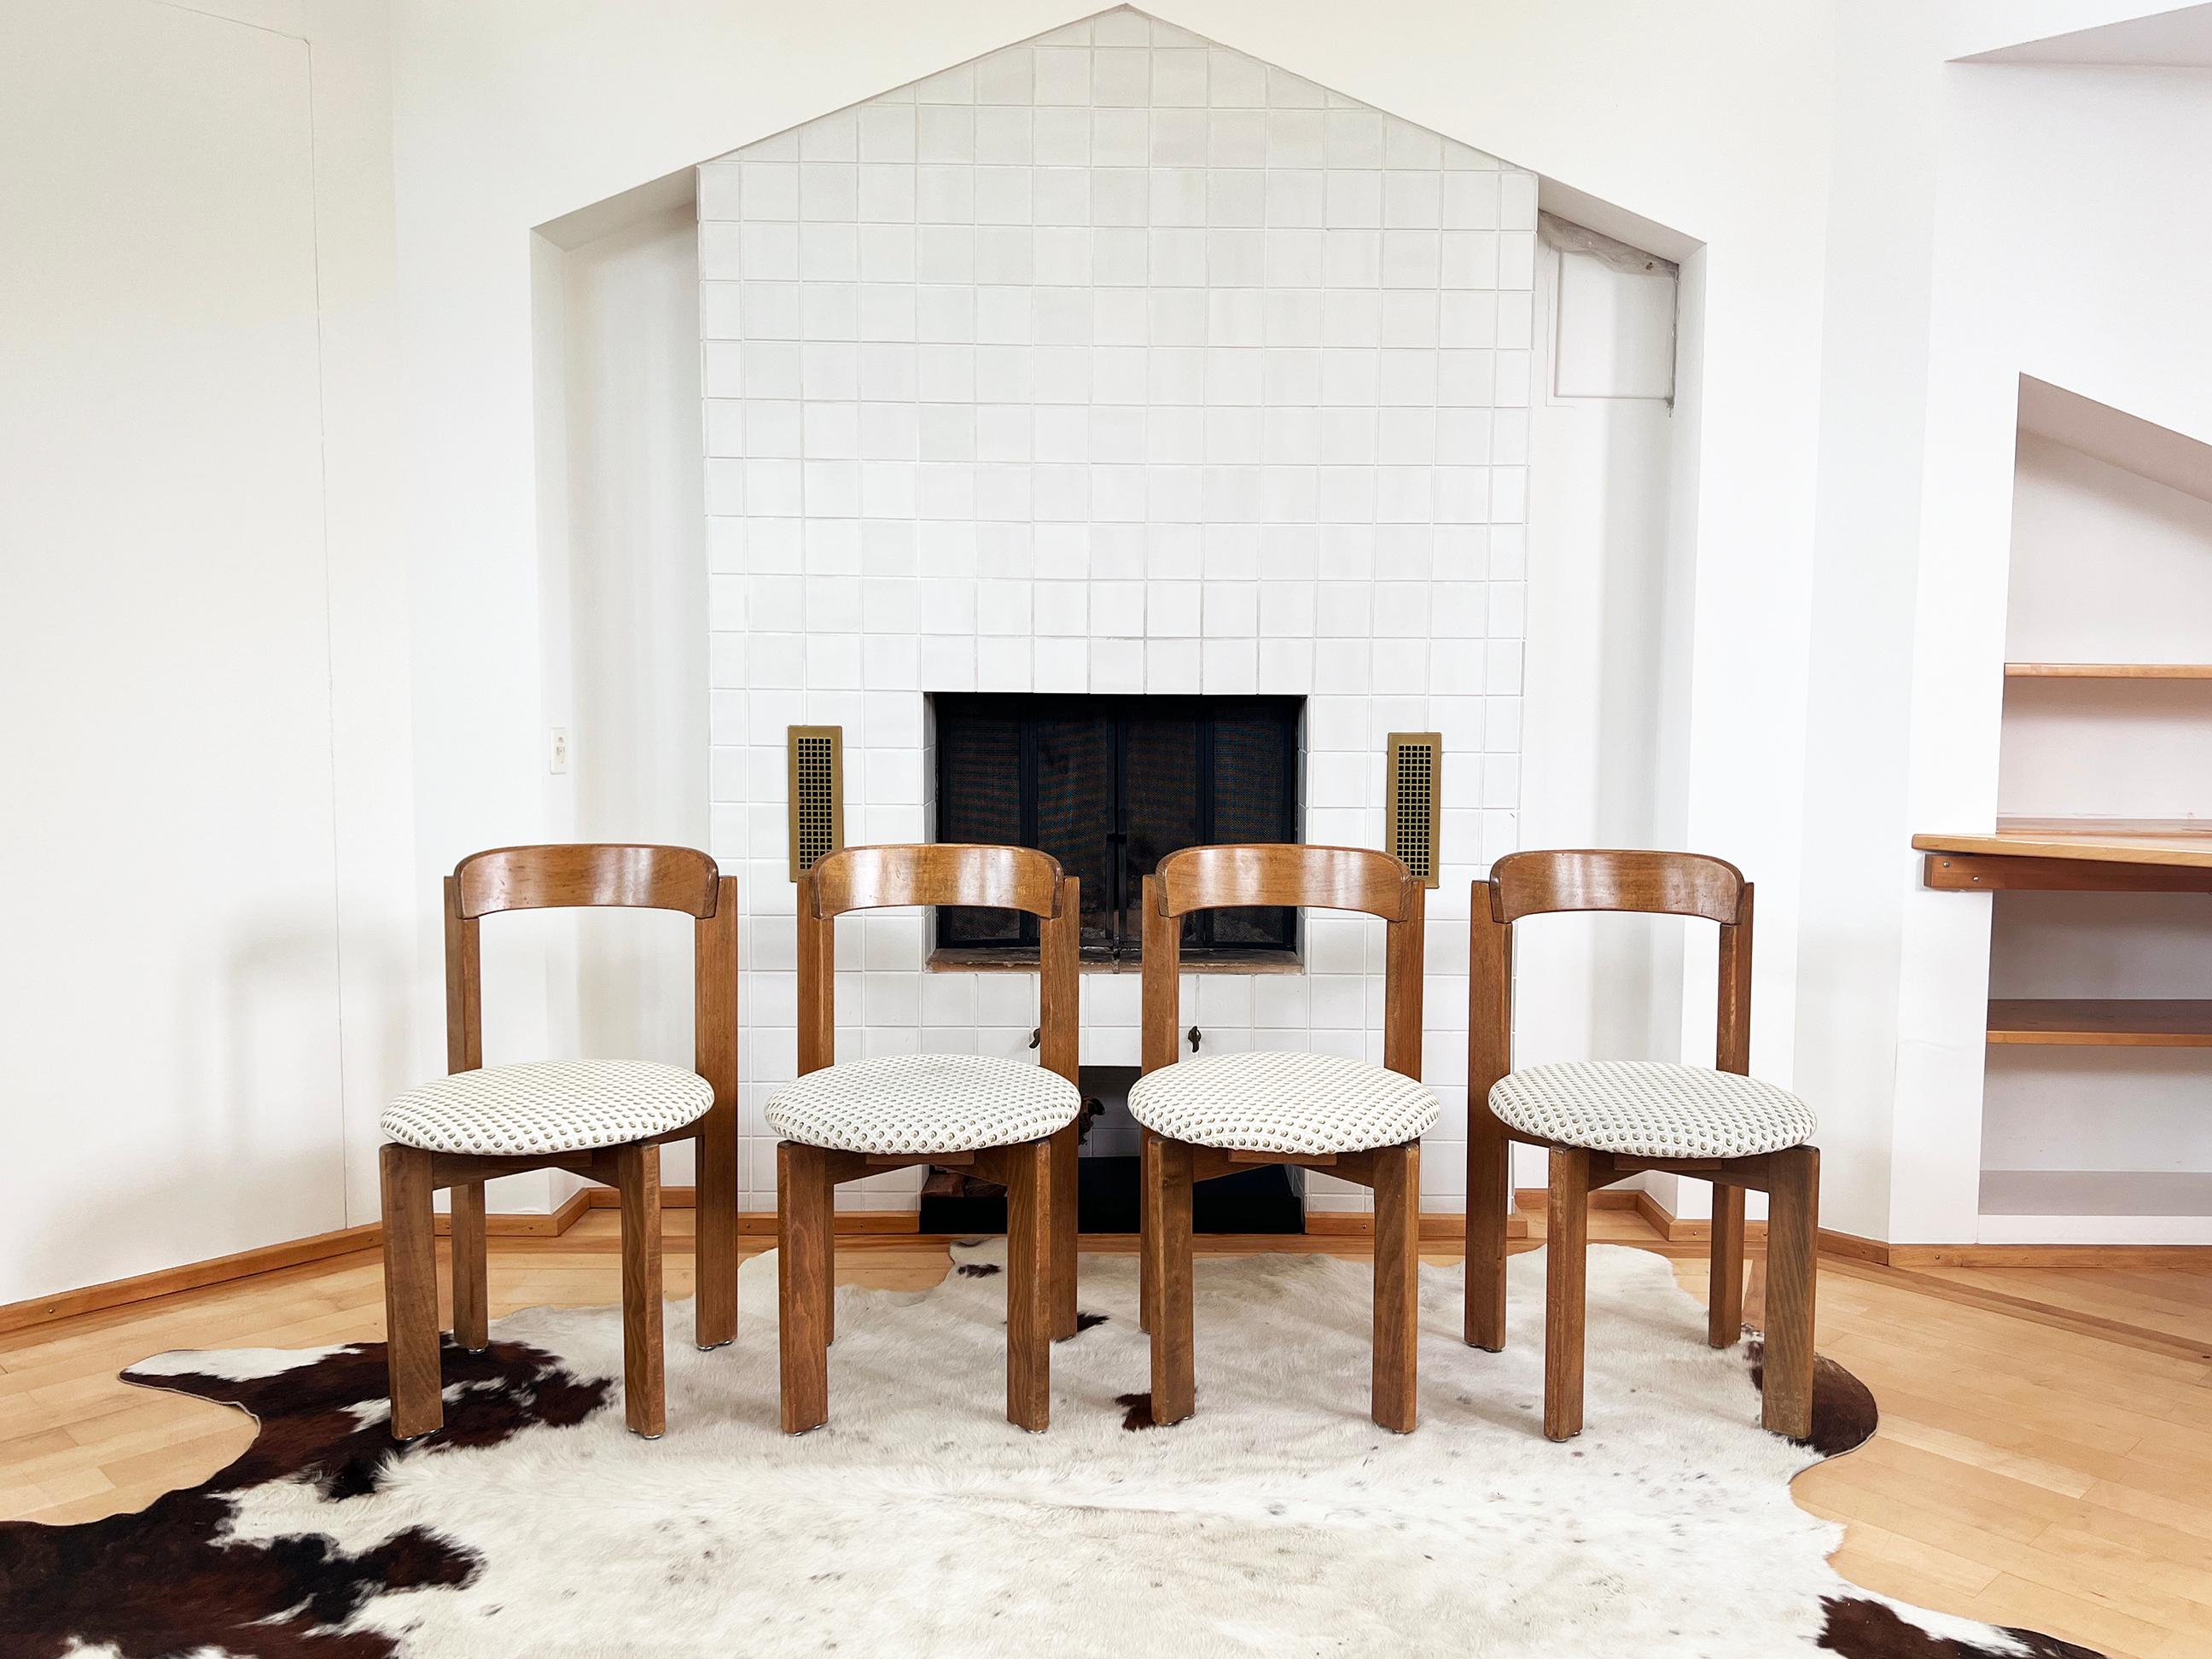 Solid Oak Brutalist, Postmodern Dining chairs from the 1970s.
Very sturdy and comfortable, high quality design, made in Switzerland.
The solid oak wood grain is phenomenal. 

Original upholstery is present-- they would benefit by being updated. 